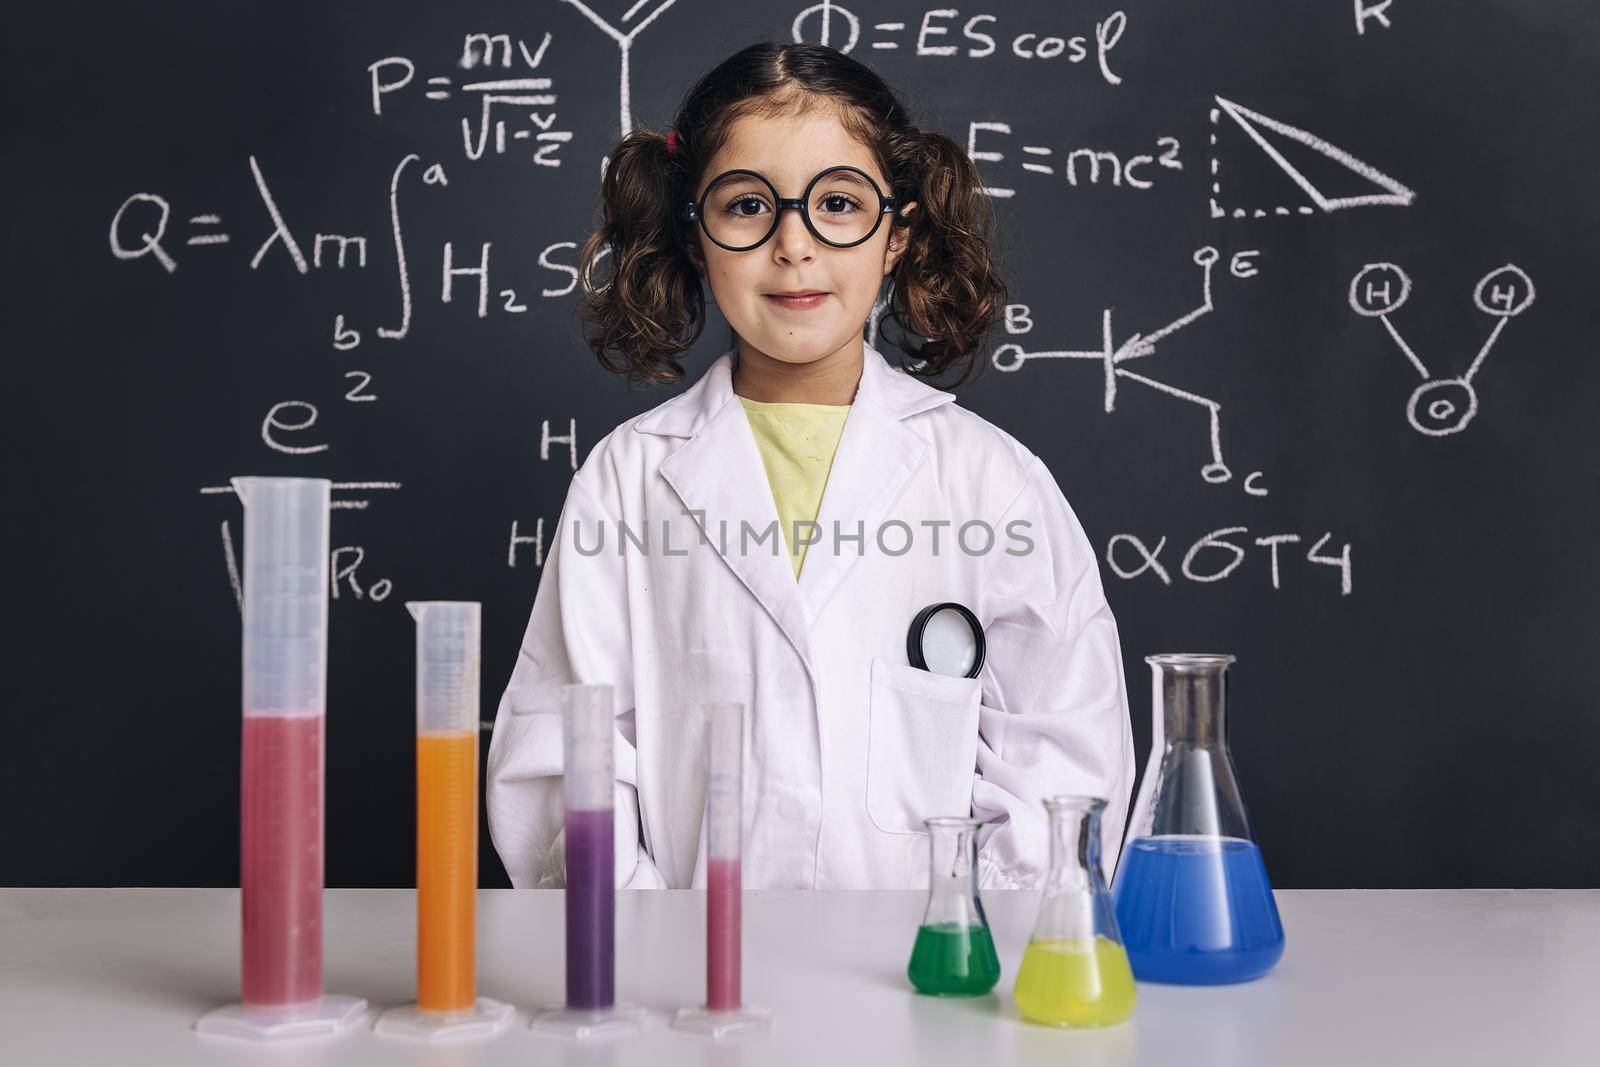 little scientist girl with glasses in lab coat with chemical flasks, on school blackboard background with hand drawn science formulas, back to school and successful female career concept